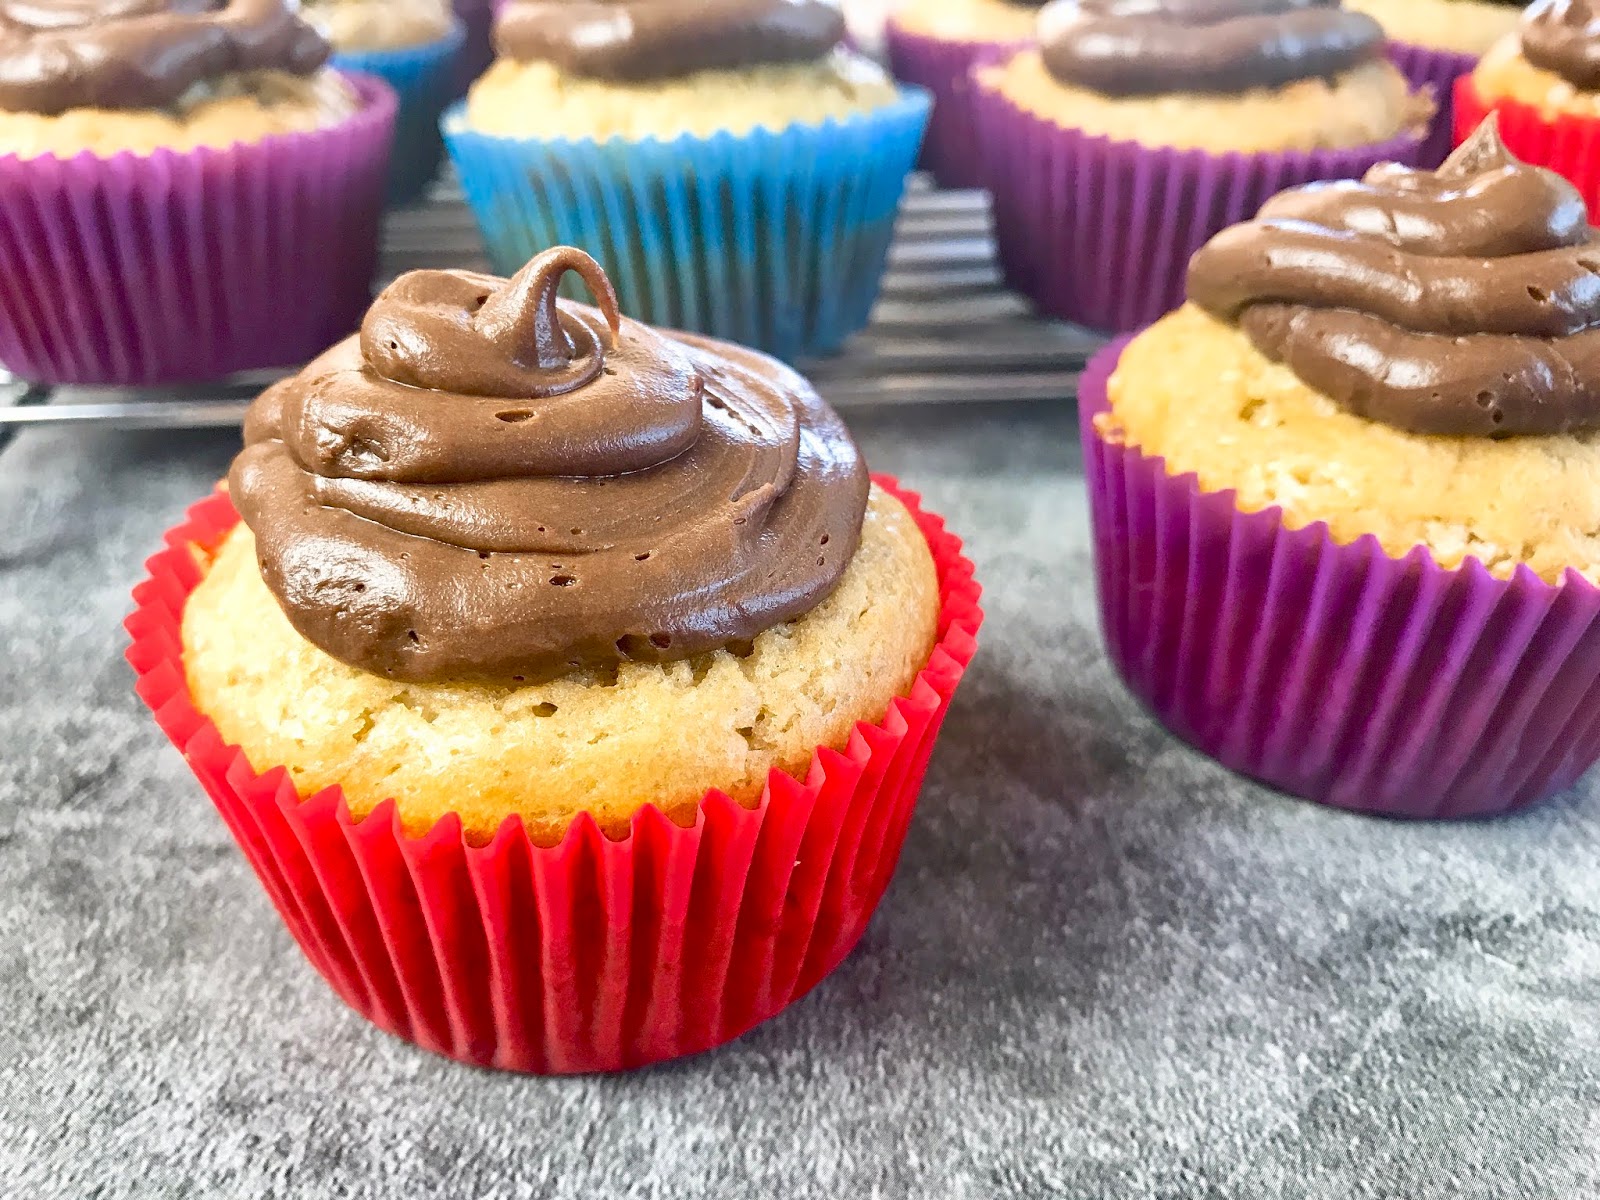 Dreamy Banana Cupcakes with Chocolate Frosting